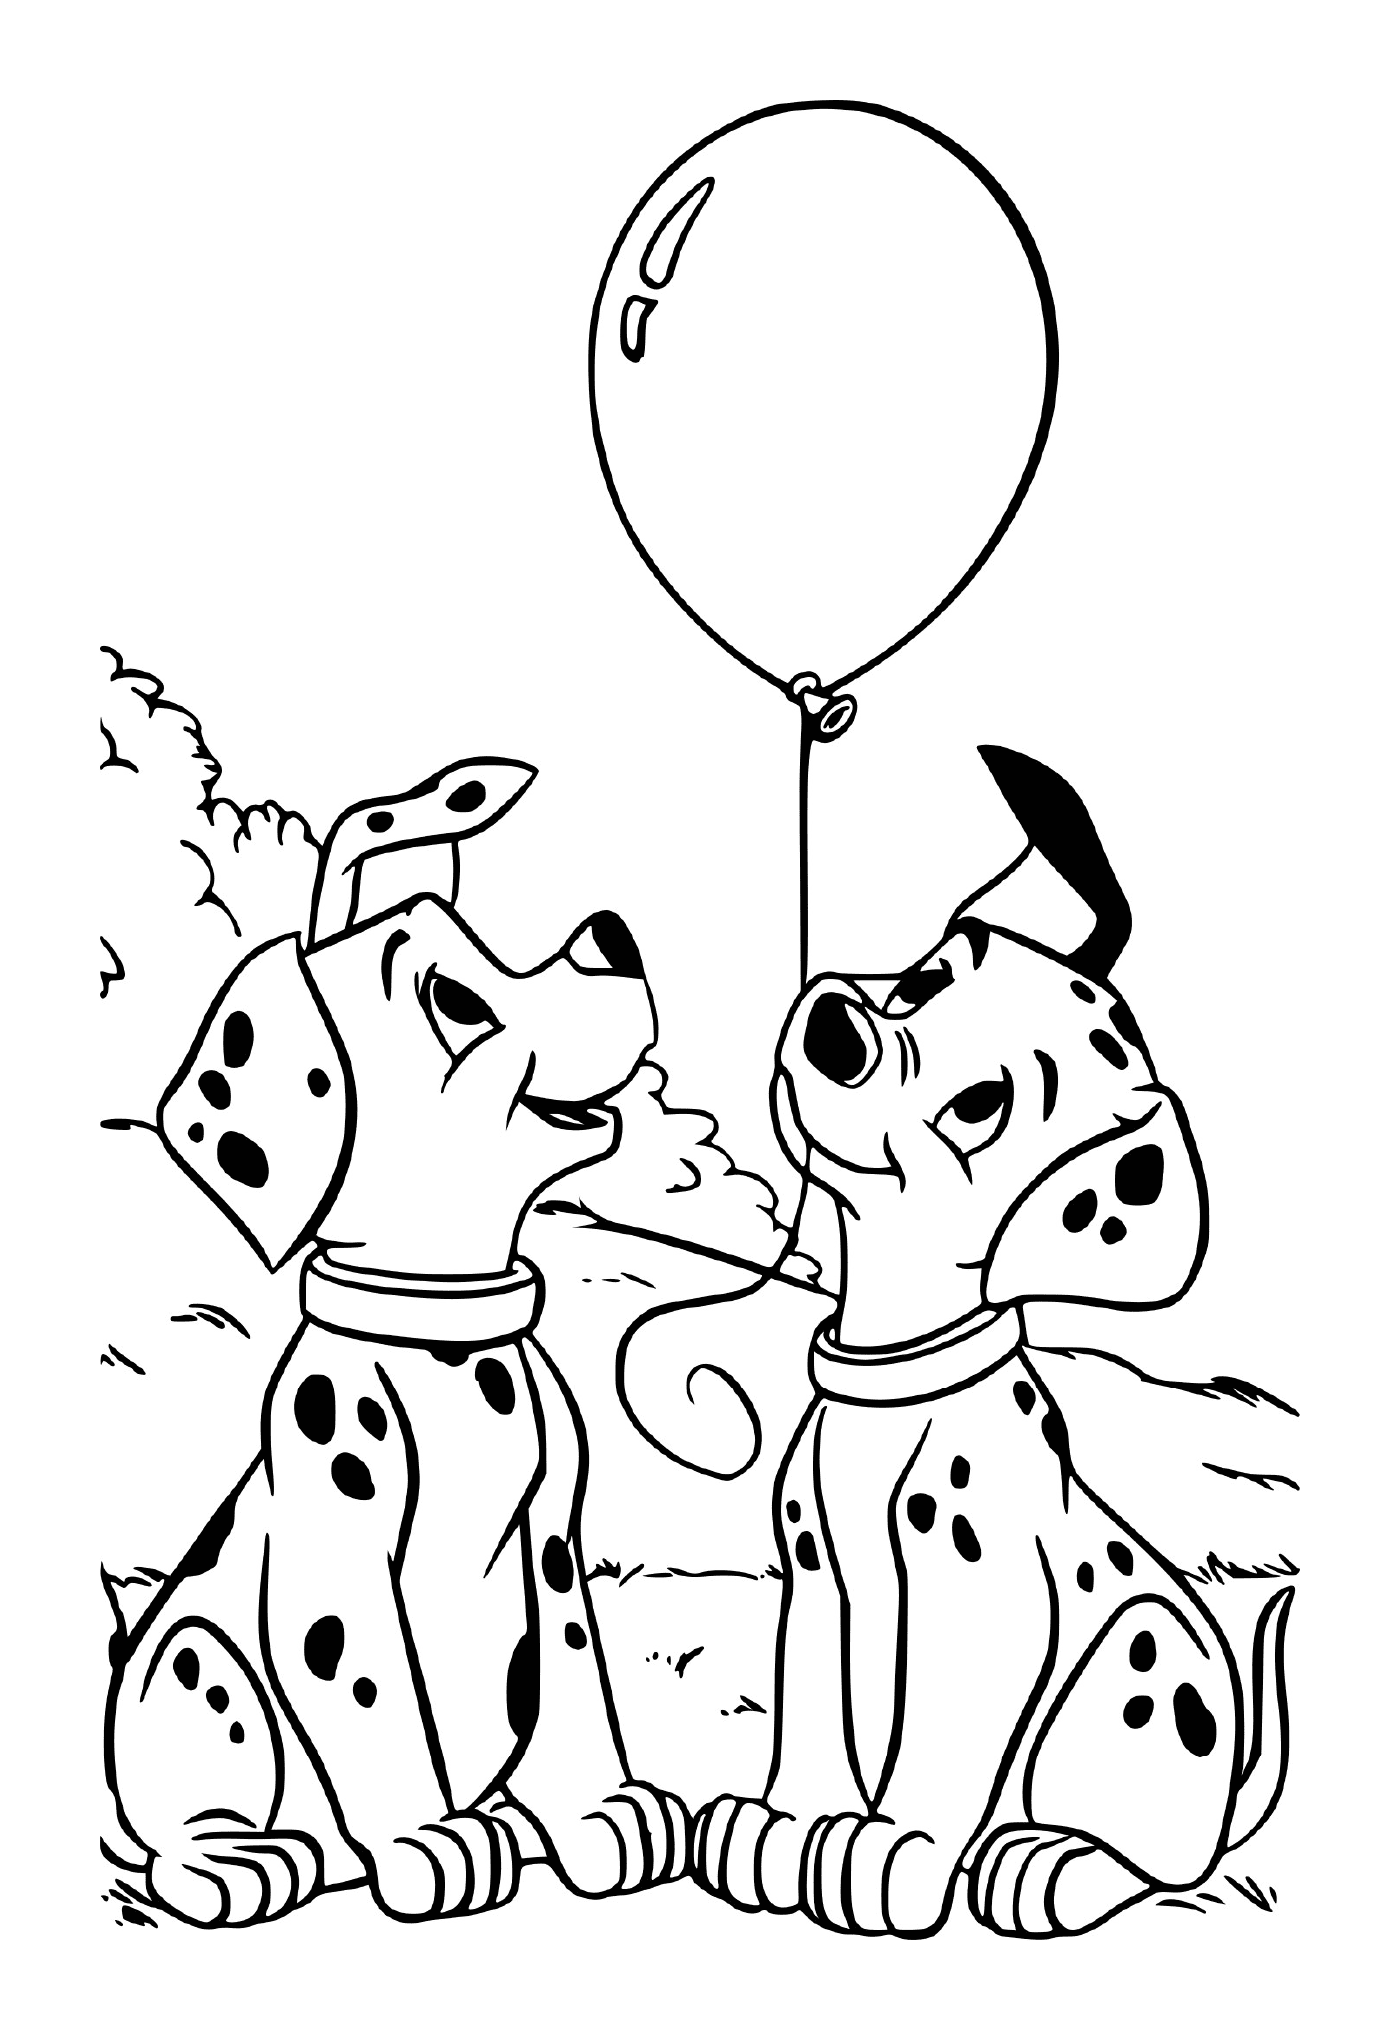  Two Dalmatians are watching a balloon 